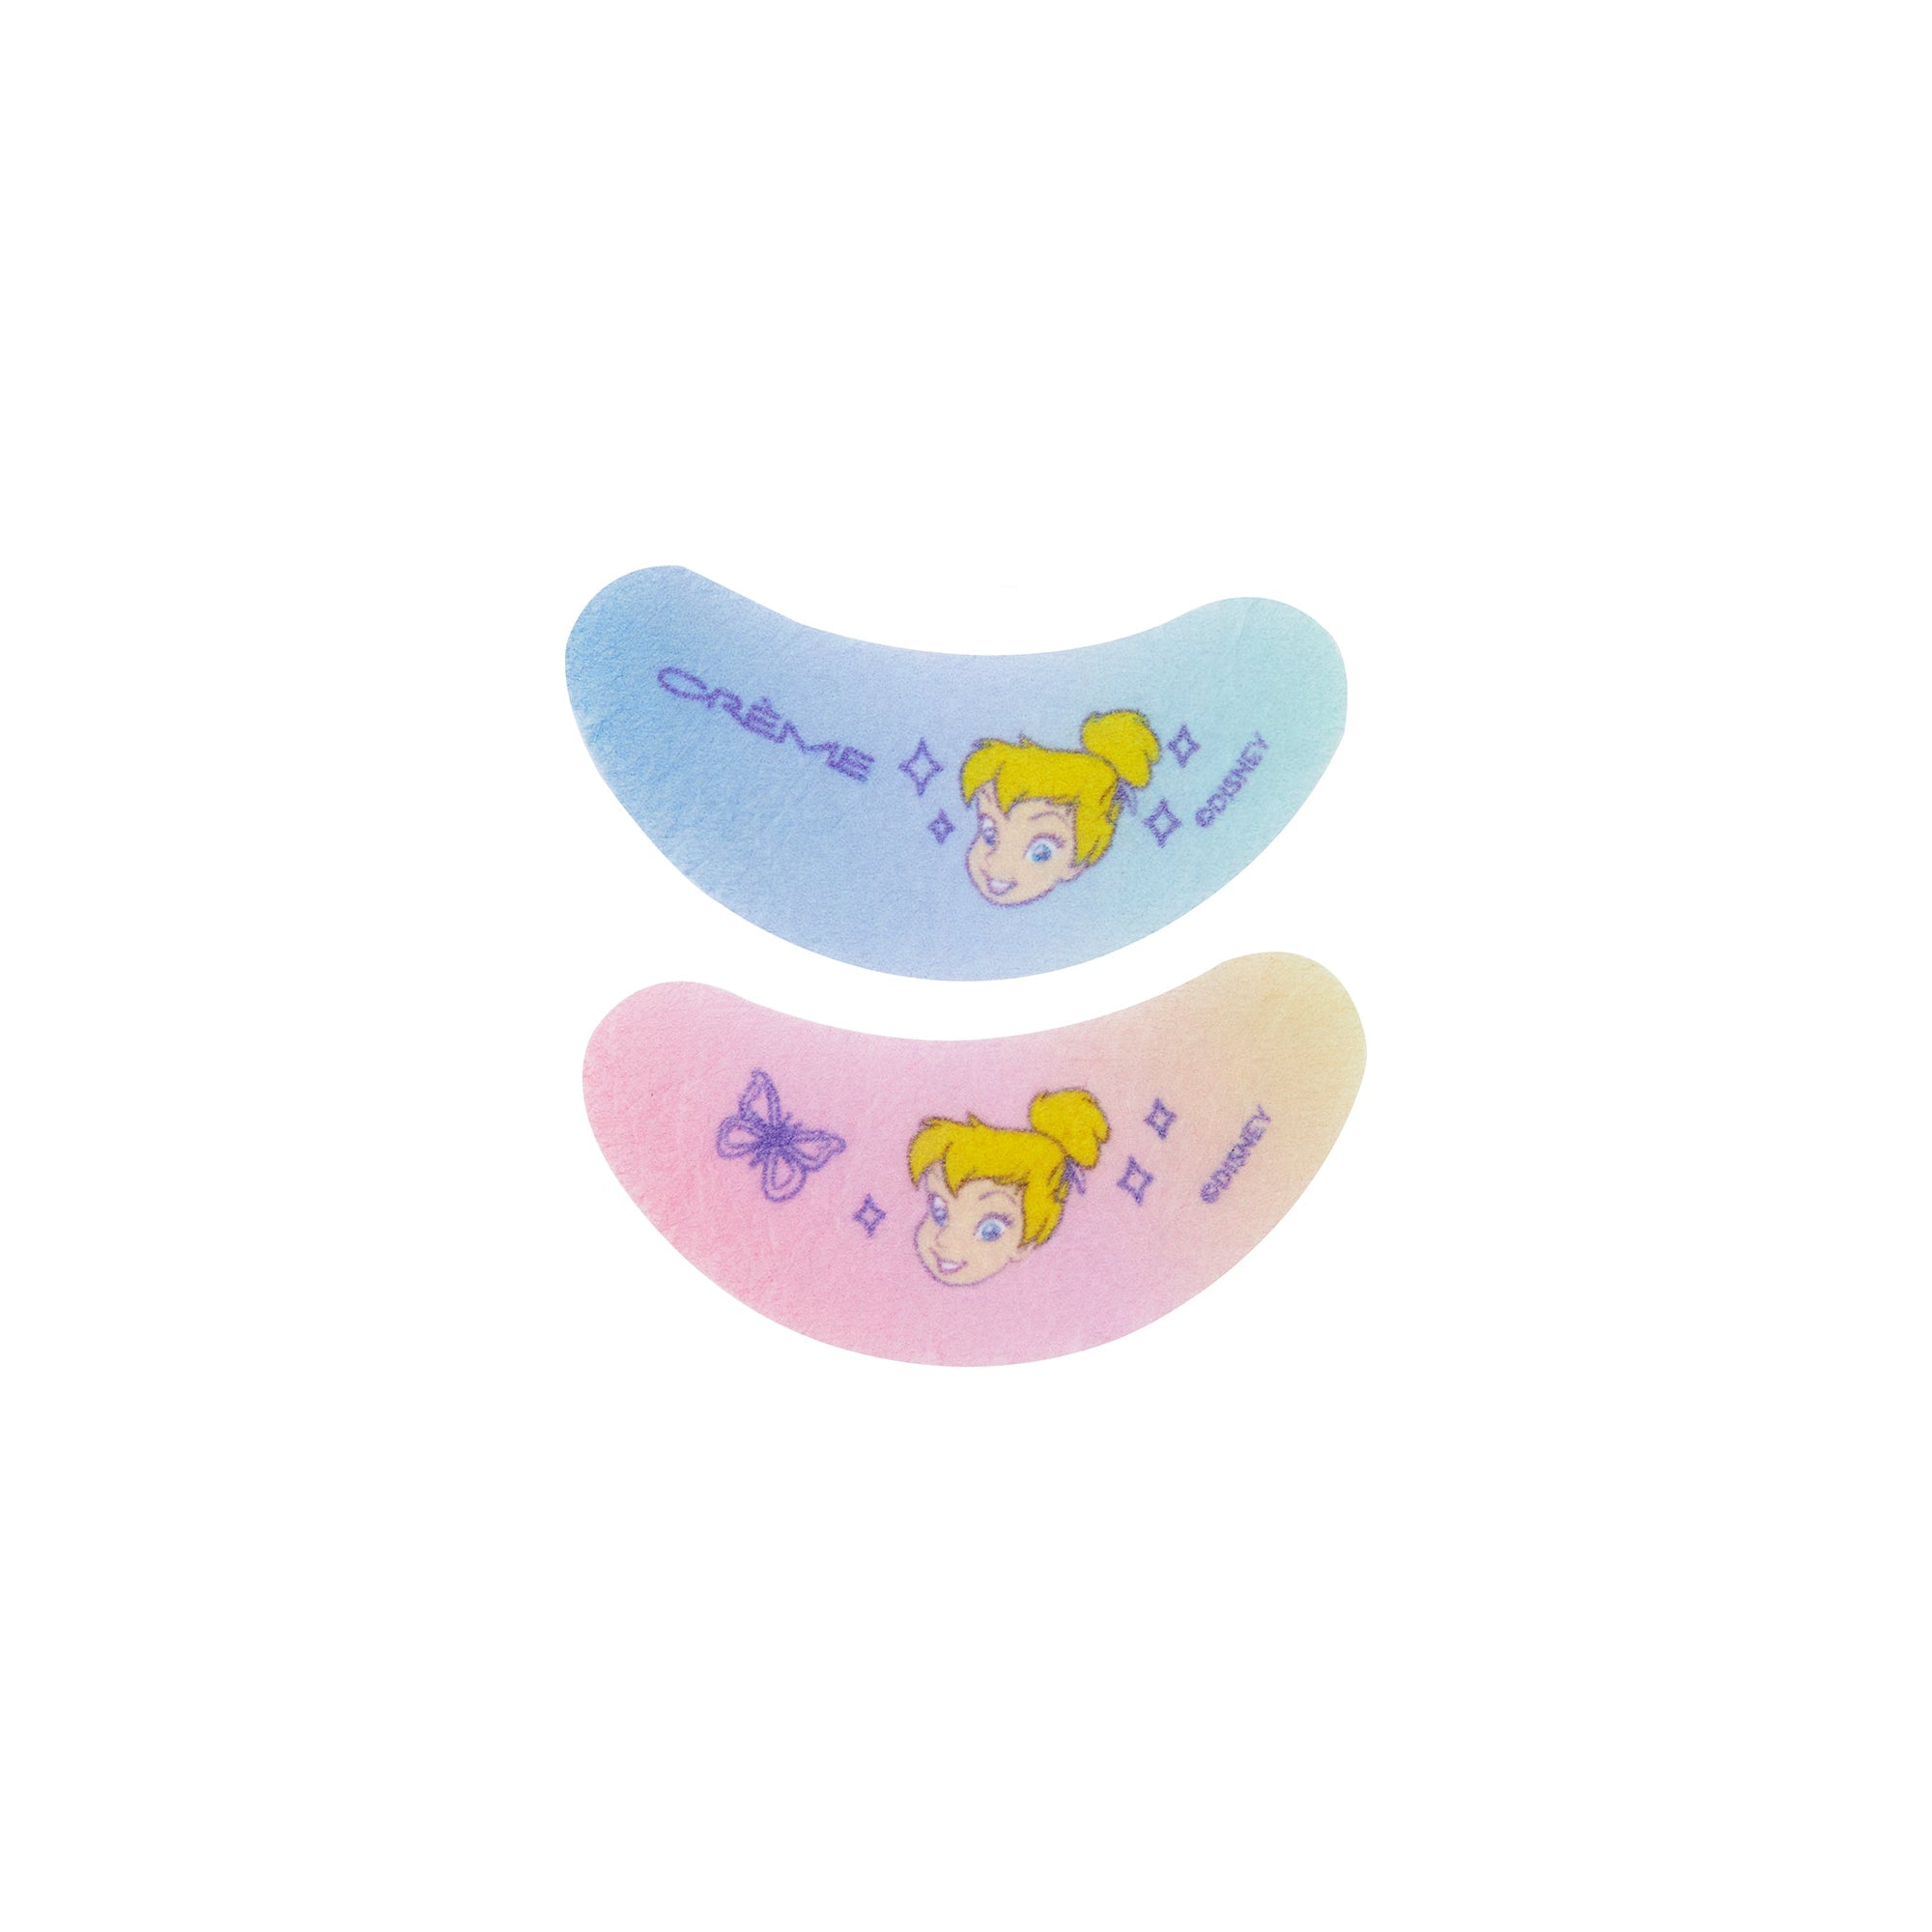 Tinkerbell Fairy Bright! Printed Under Eye Patches (3 Pairs) The Crème Shop 